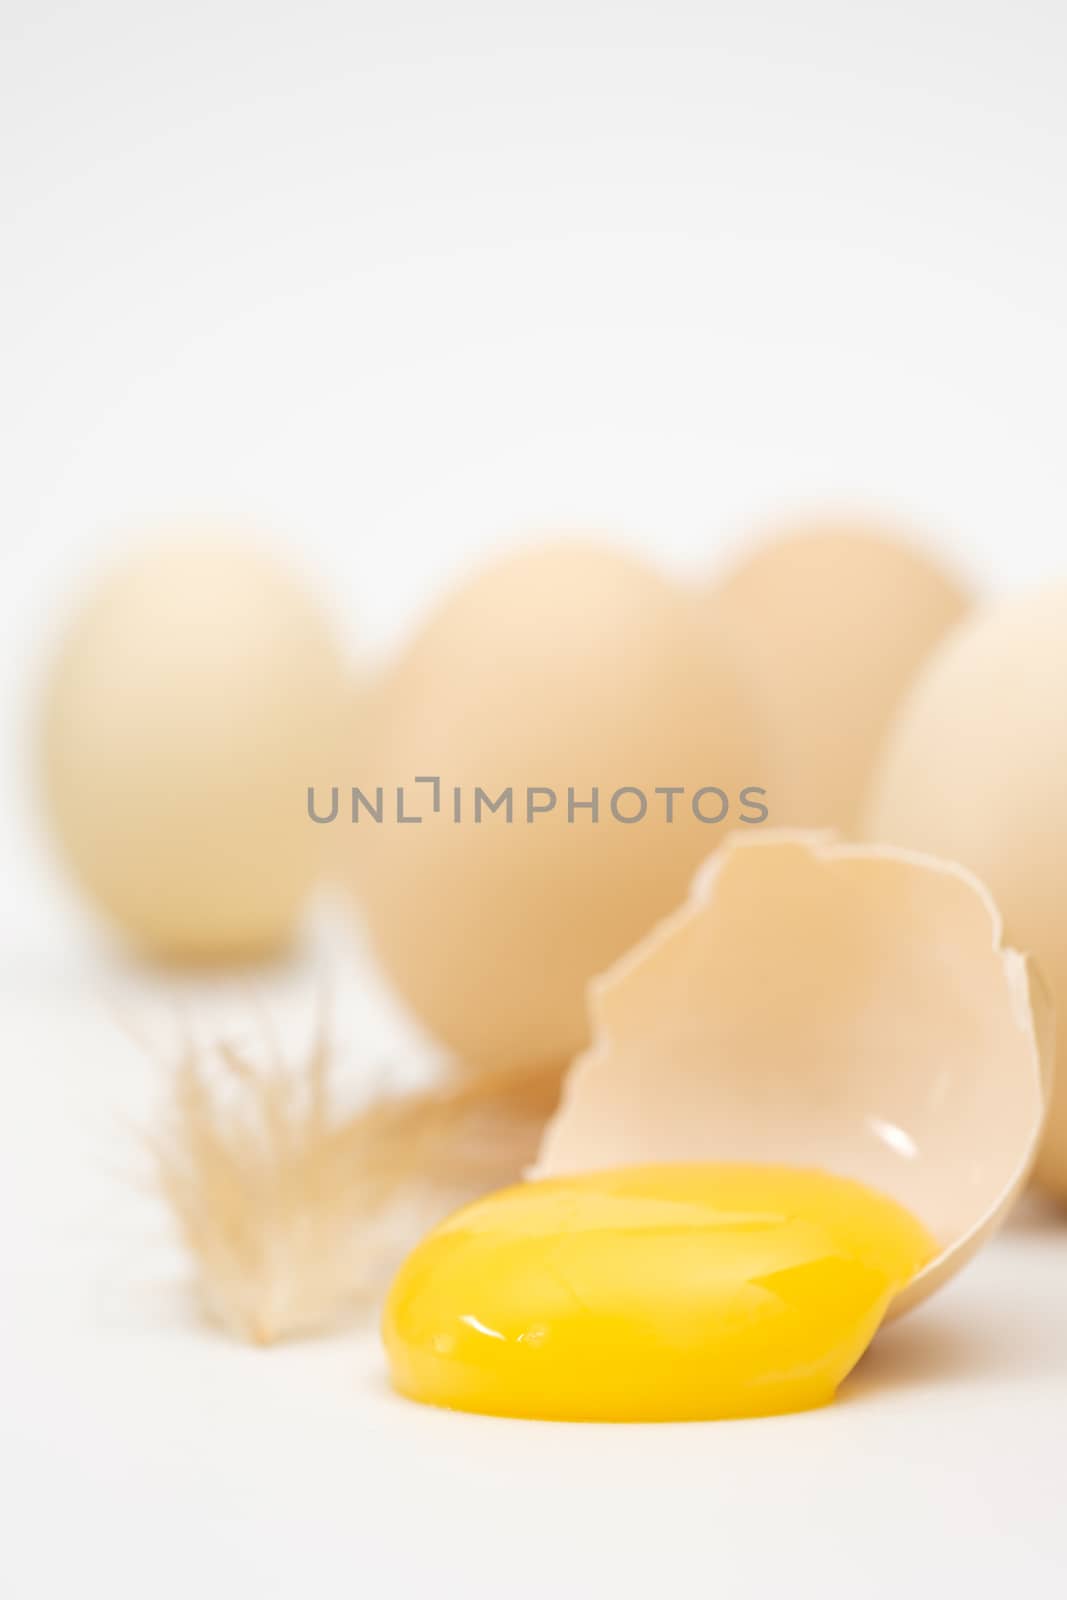 Eggs and yolks arranged in a white scene, Egg is beneficial to the body, Food concept.